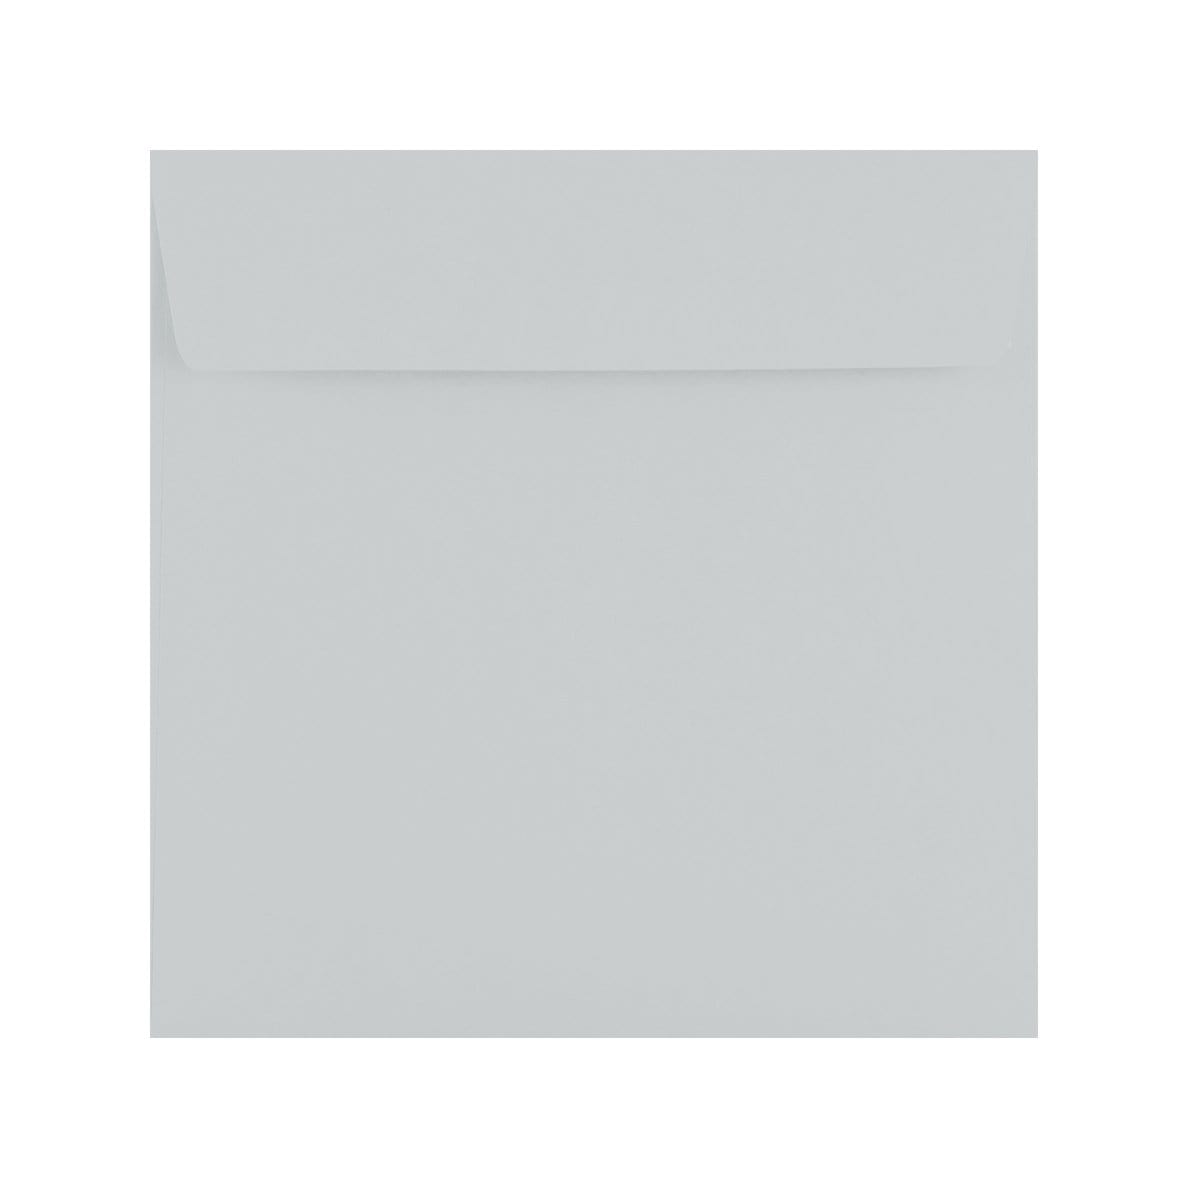 products/155x155-square-pale-grey-envelopes.jpg